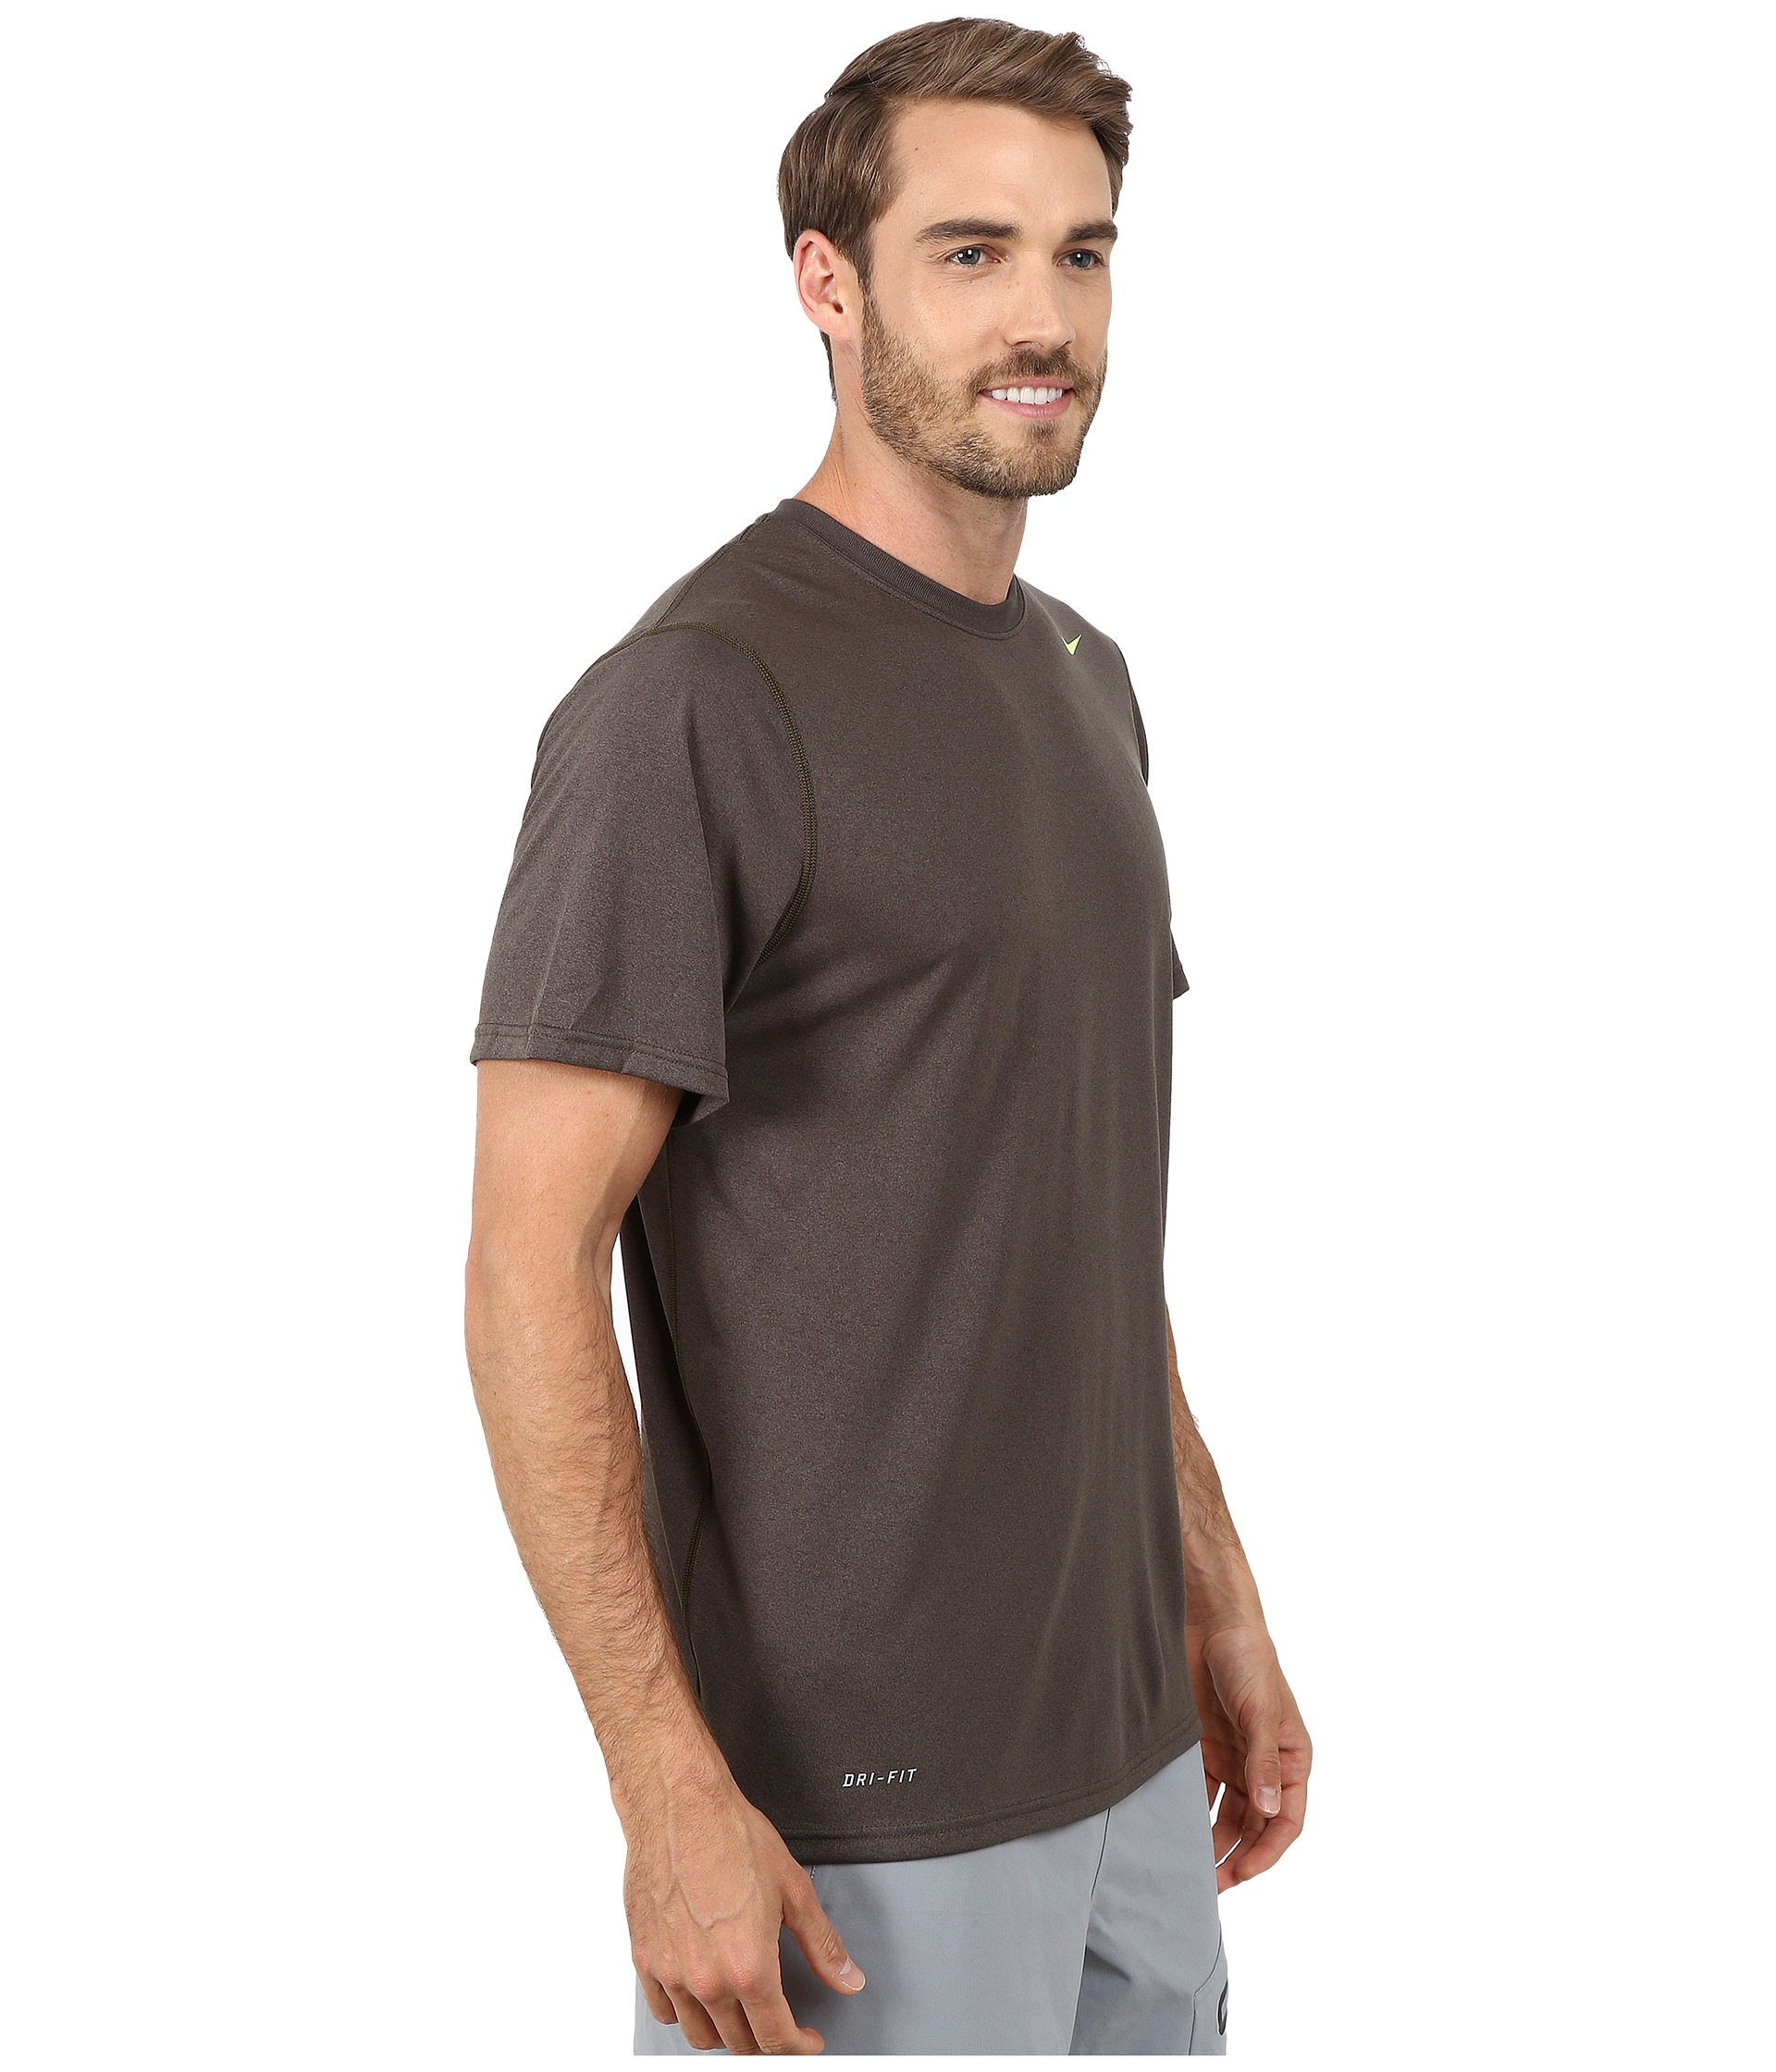 Lyst - Nike Legend Dri-fit™ Poly S/s Crew Top in Natural for Men